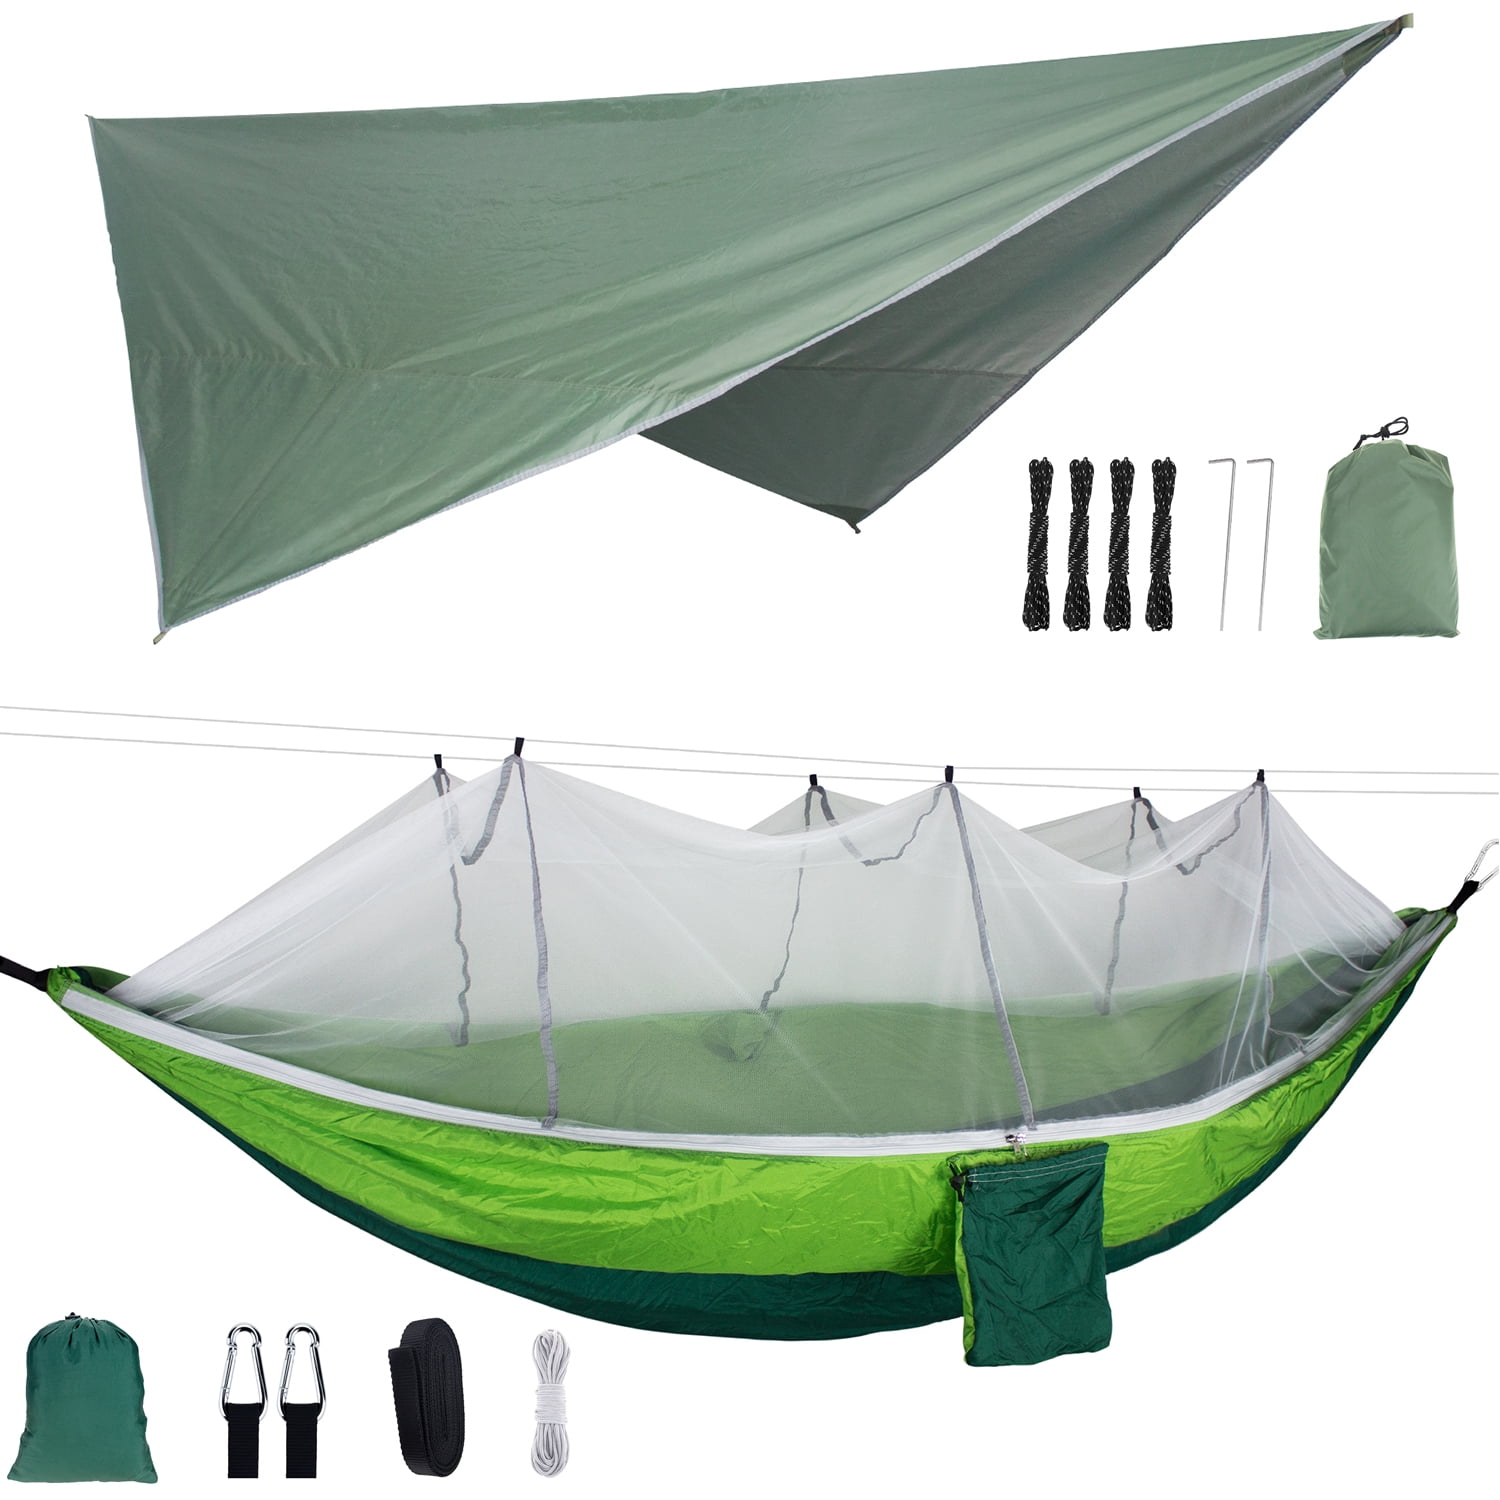 Night Cat Camping Hammock Tent with Mosquito Net and Rain Fly for 1 2 Persons Backpacking Bed with Tree Strap Lightweight Waterproof Hiking Backyard Outdoor 440lbs